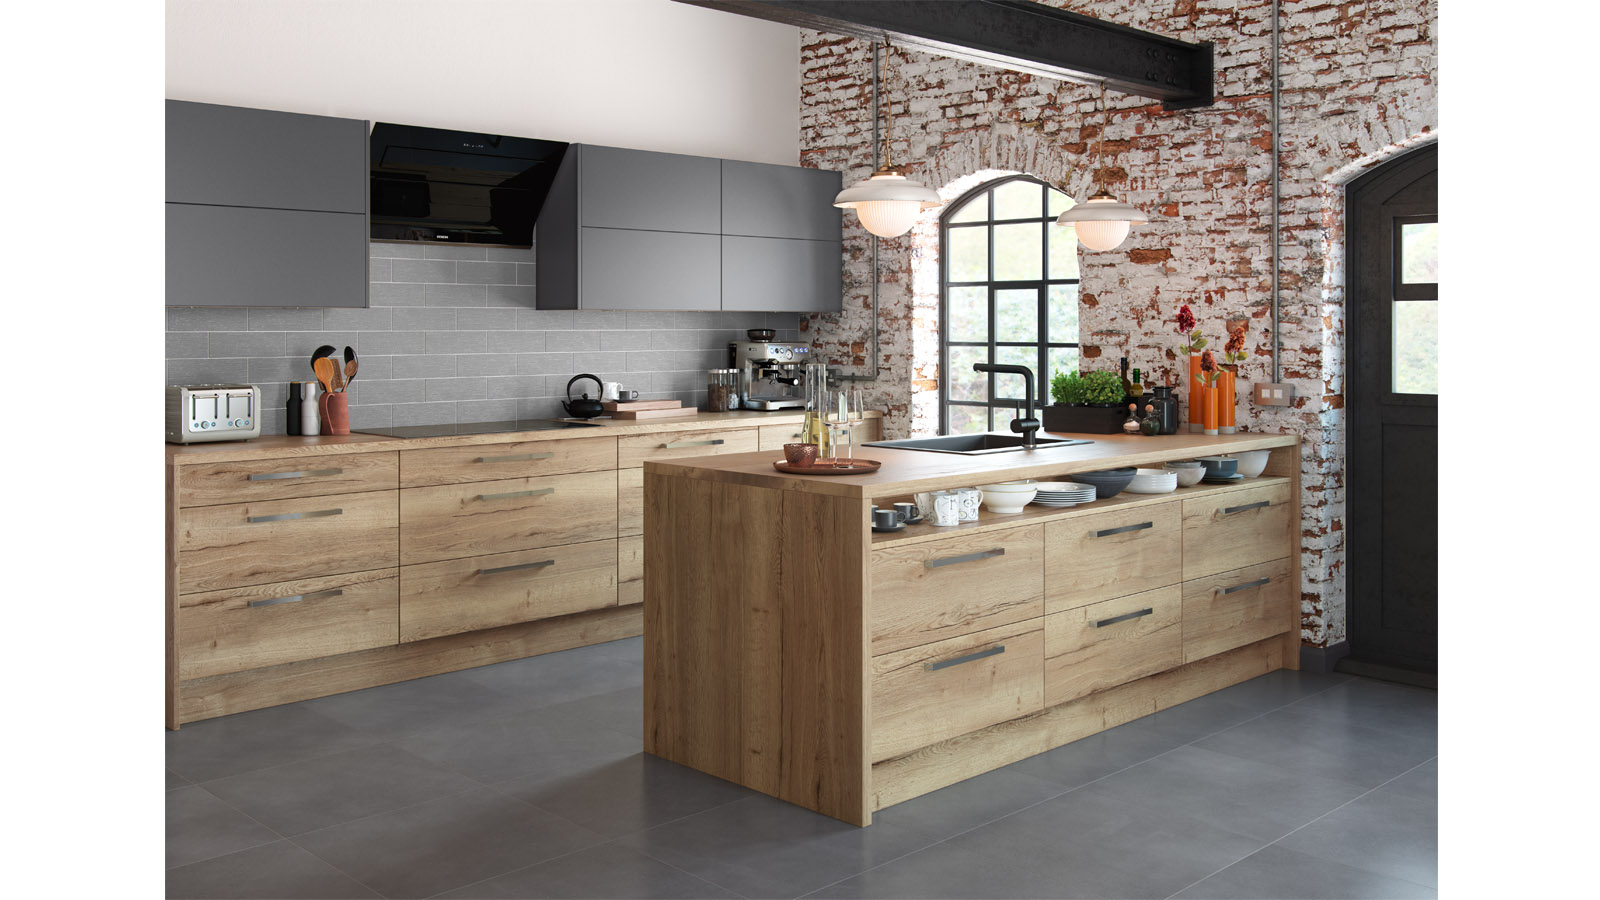 Kitchen trends for 2020 1